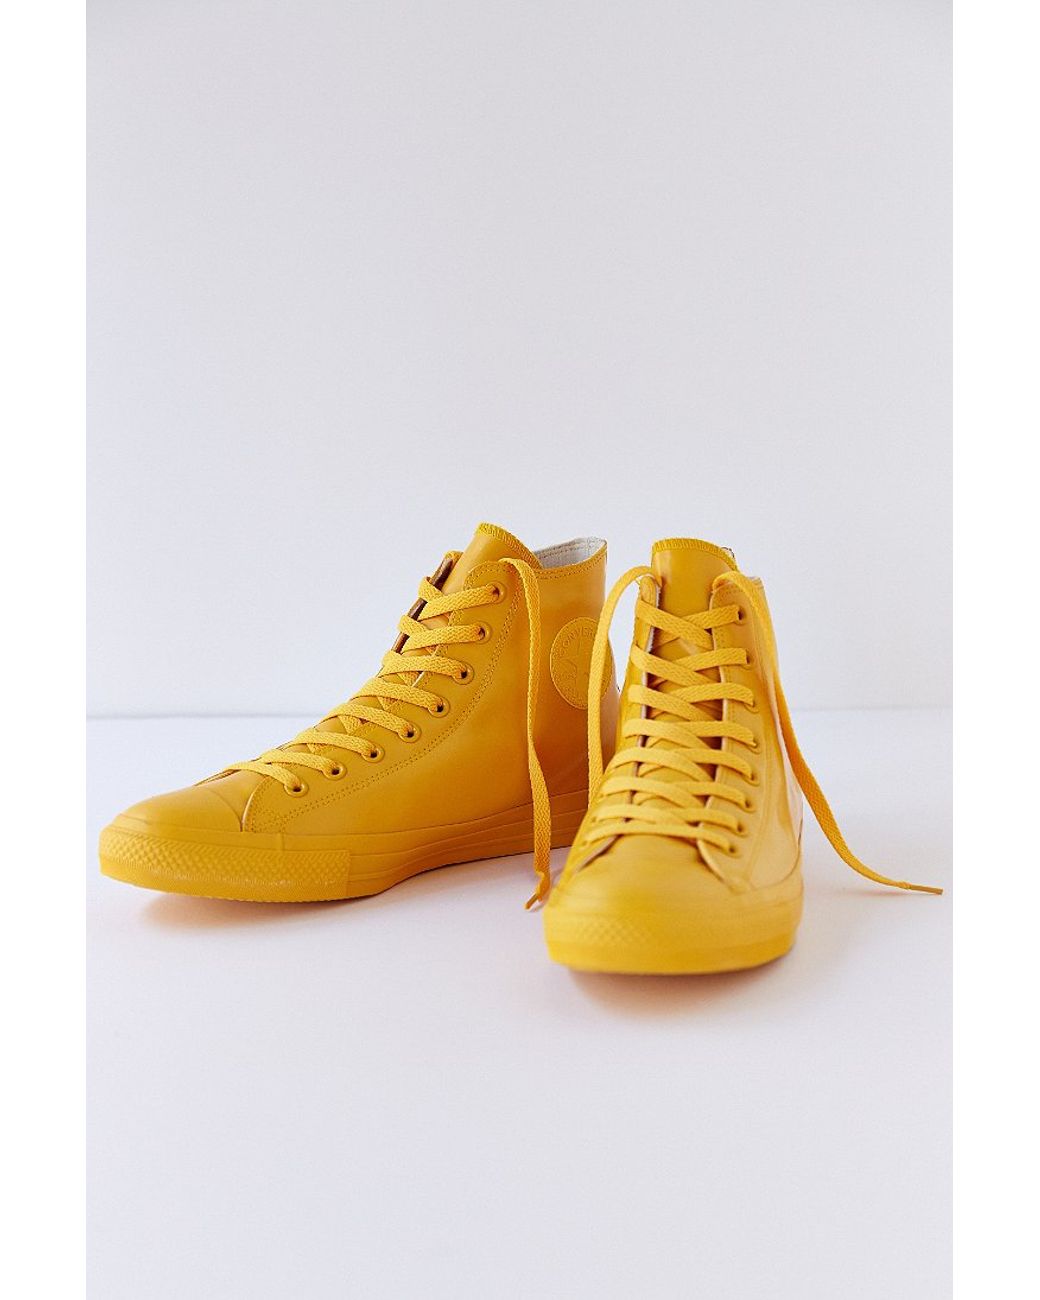 Taylor All Rubber High-top Sneakerboot in Yellow for Men | Lyst